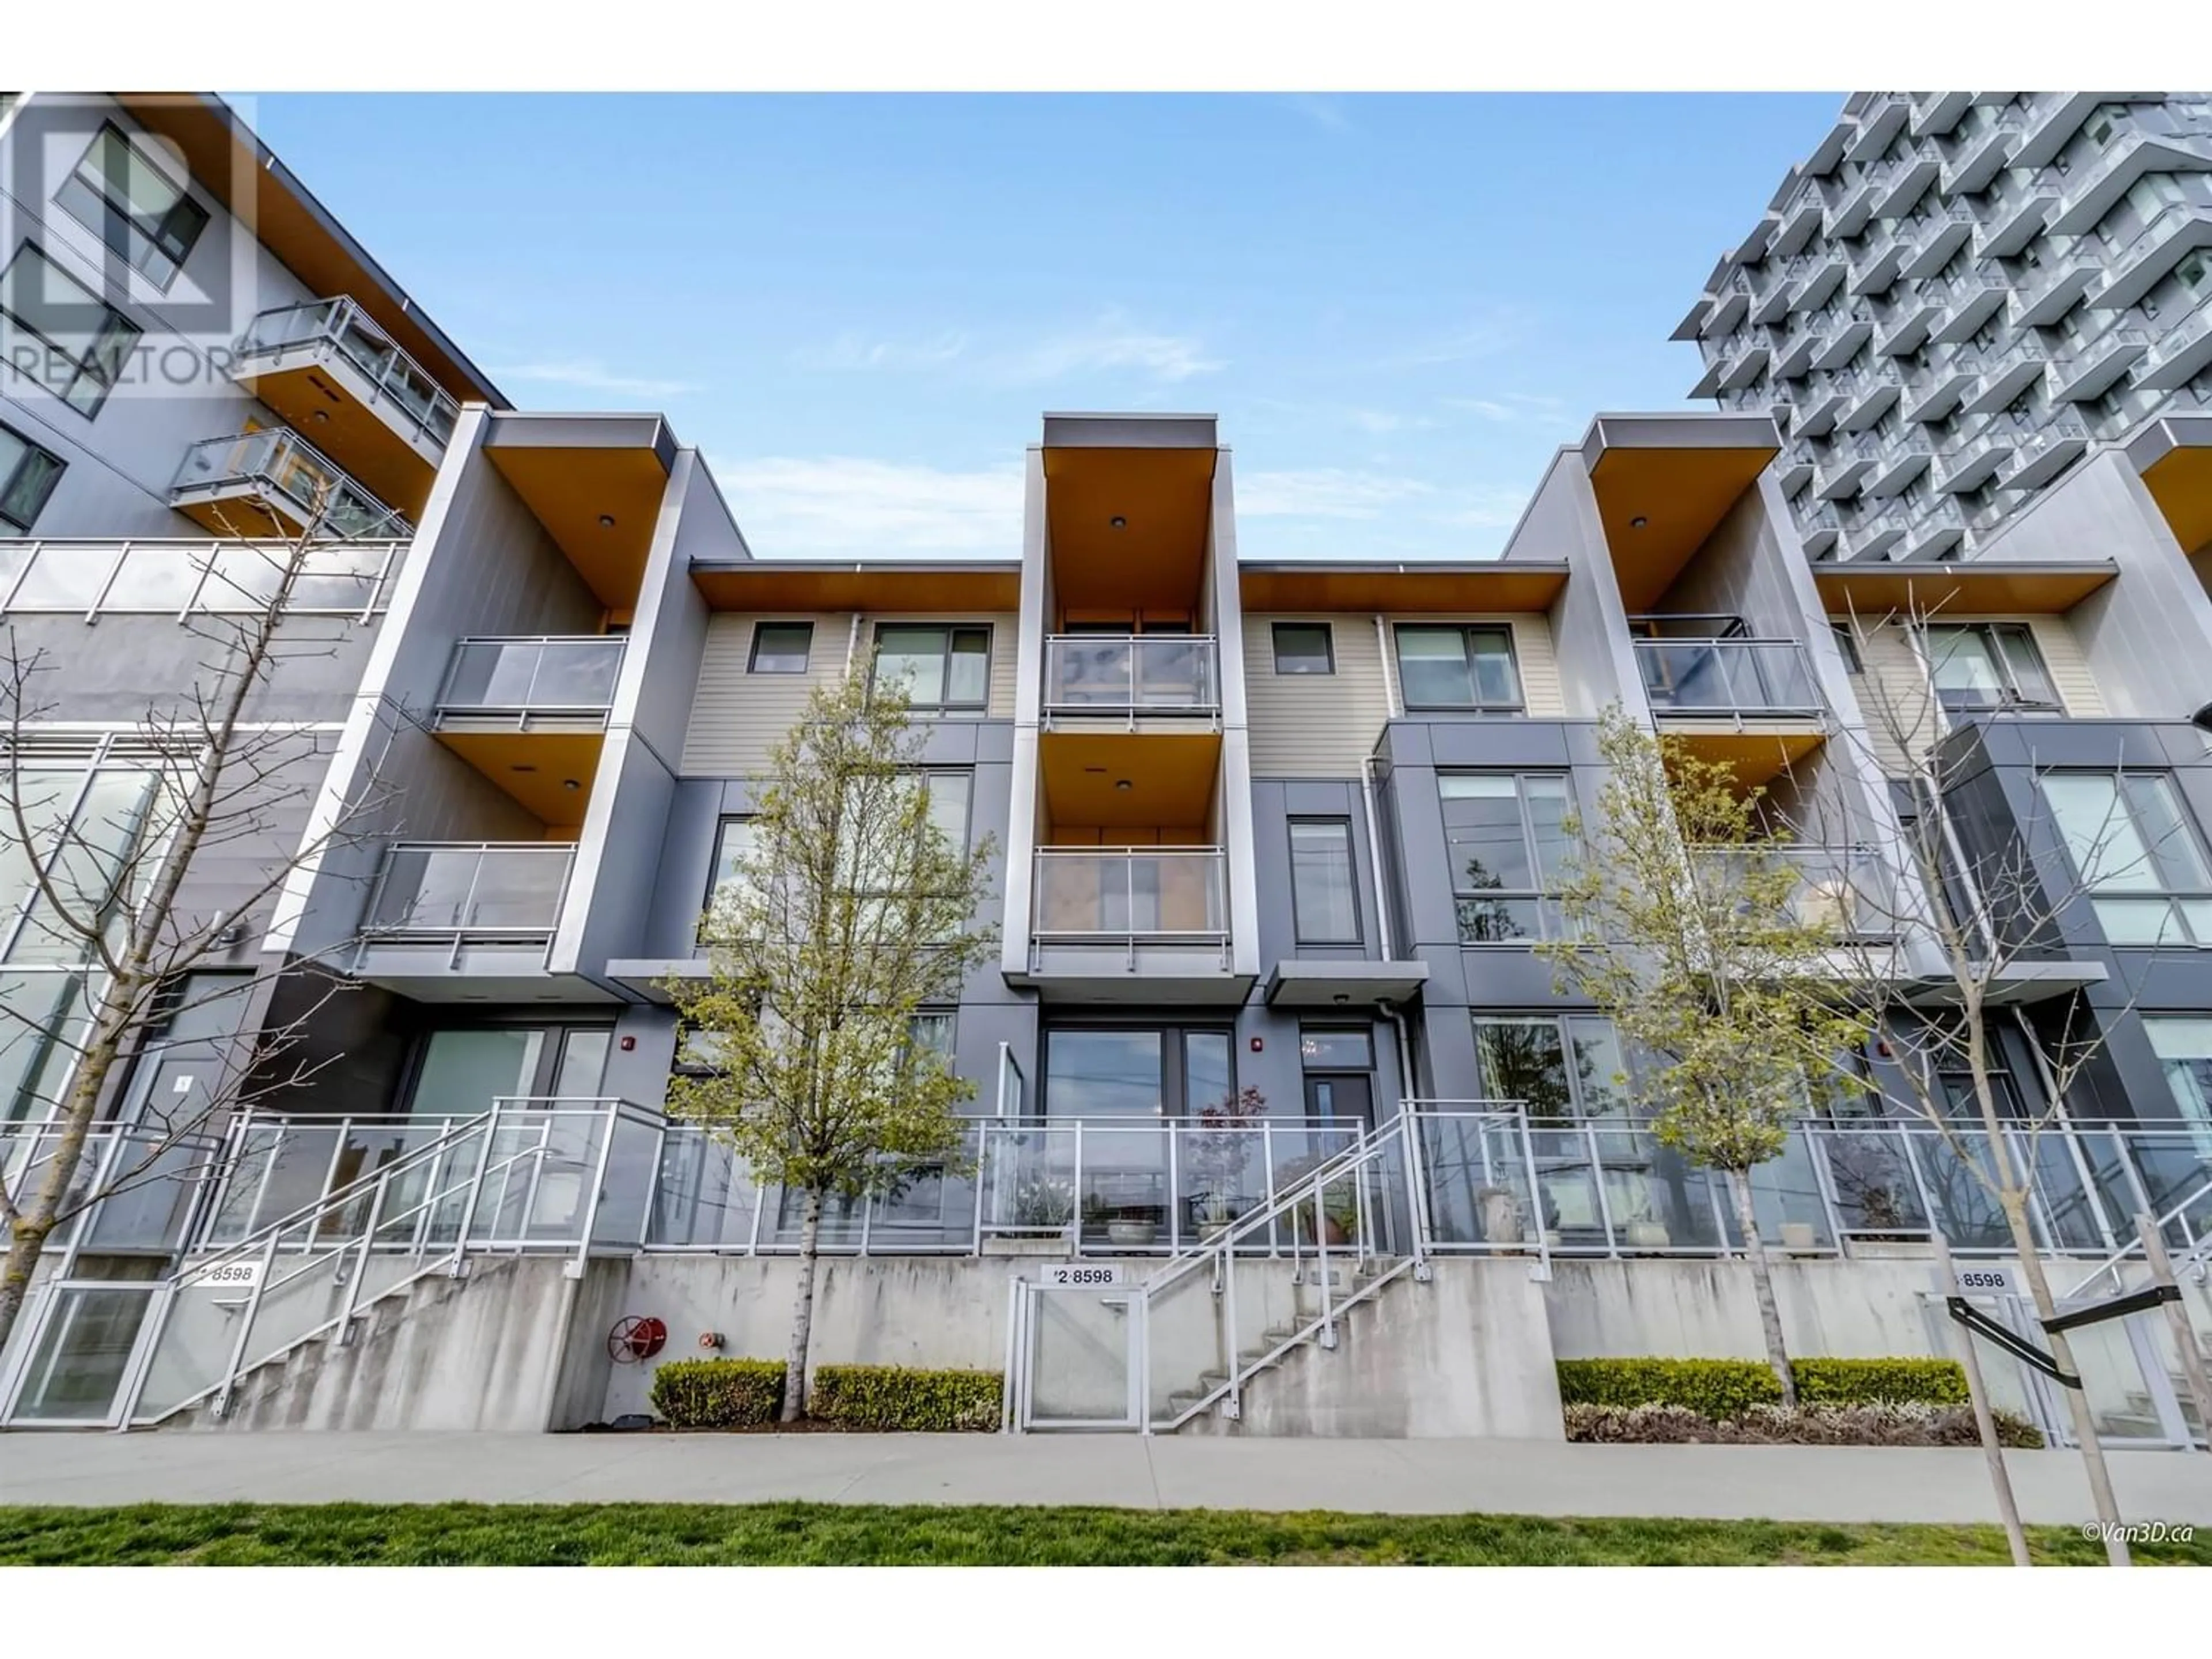 A pic from exterior of the house or condo for 2 8598 RIVER DISTRICT CROSSING, Vancouver British Columbia V5S0C1